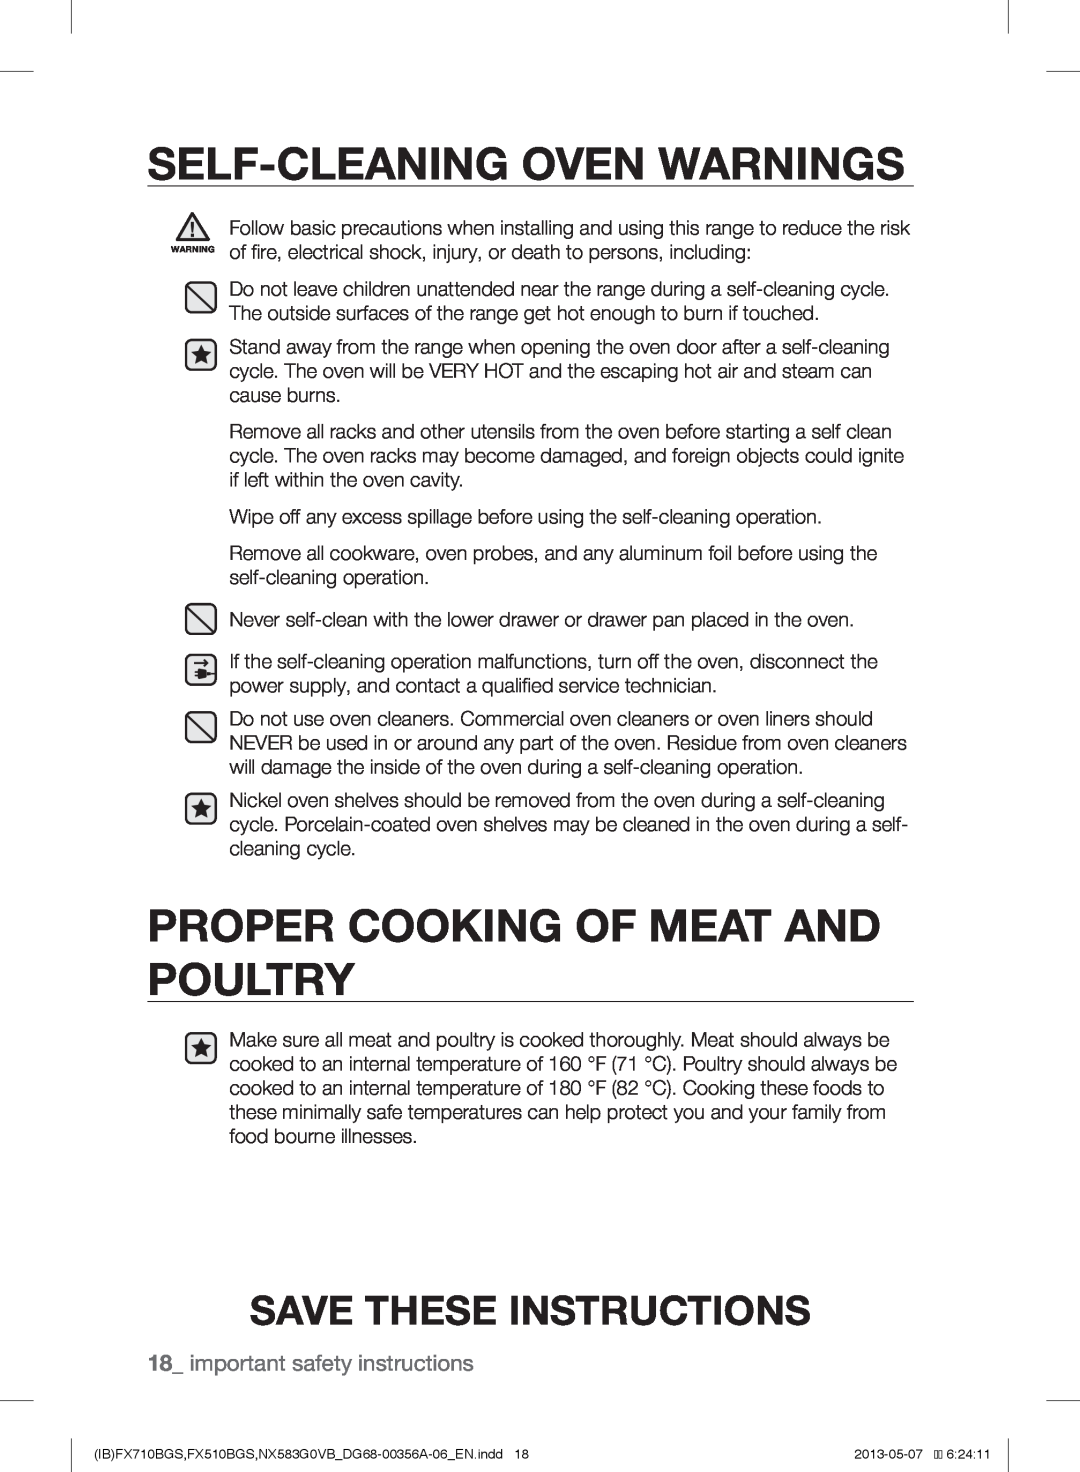 Samsung NX583GOVBBB, NX583GOVBSR Self-Cleaning Oven Warnings, Proper Cooking Of Meat And Poultry, Save These Instructions 